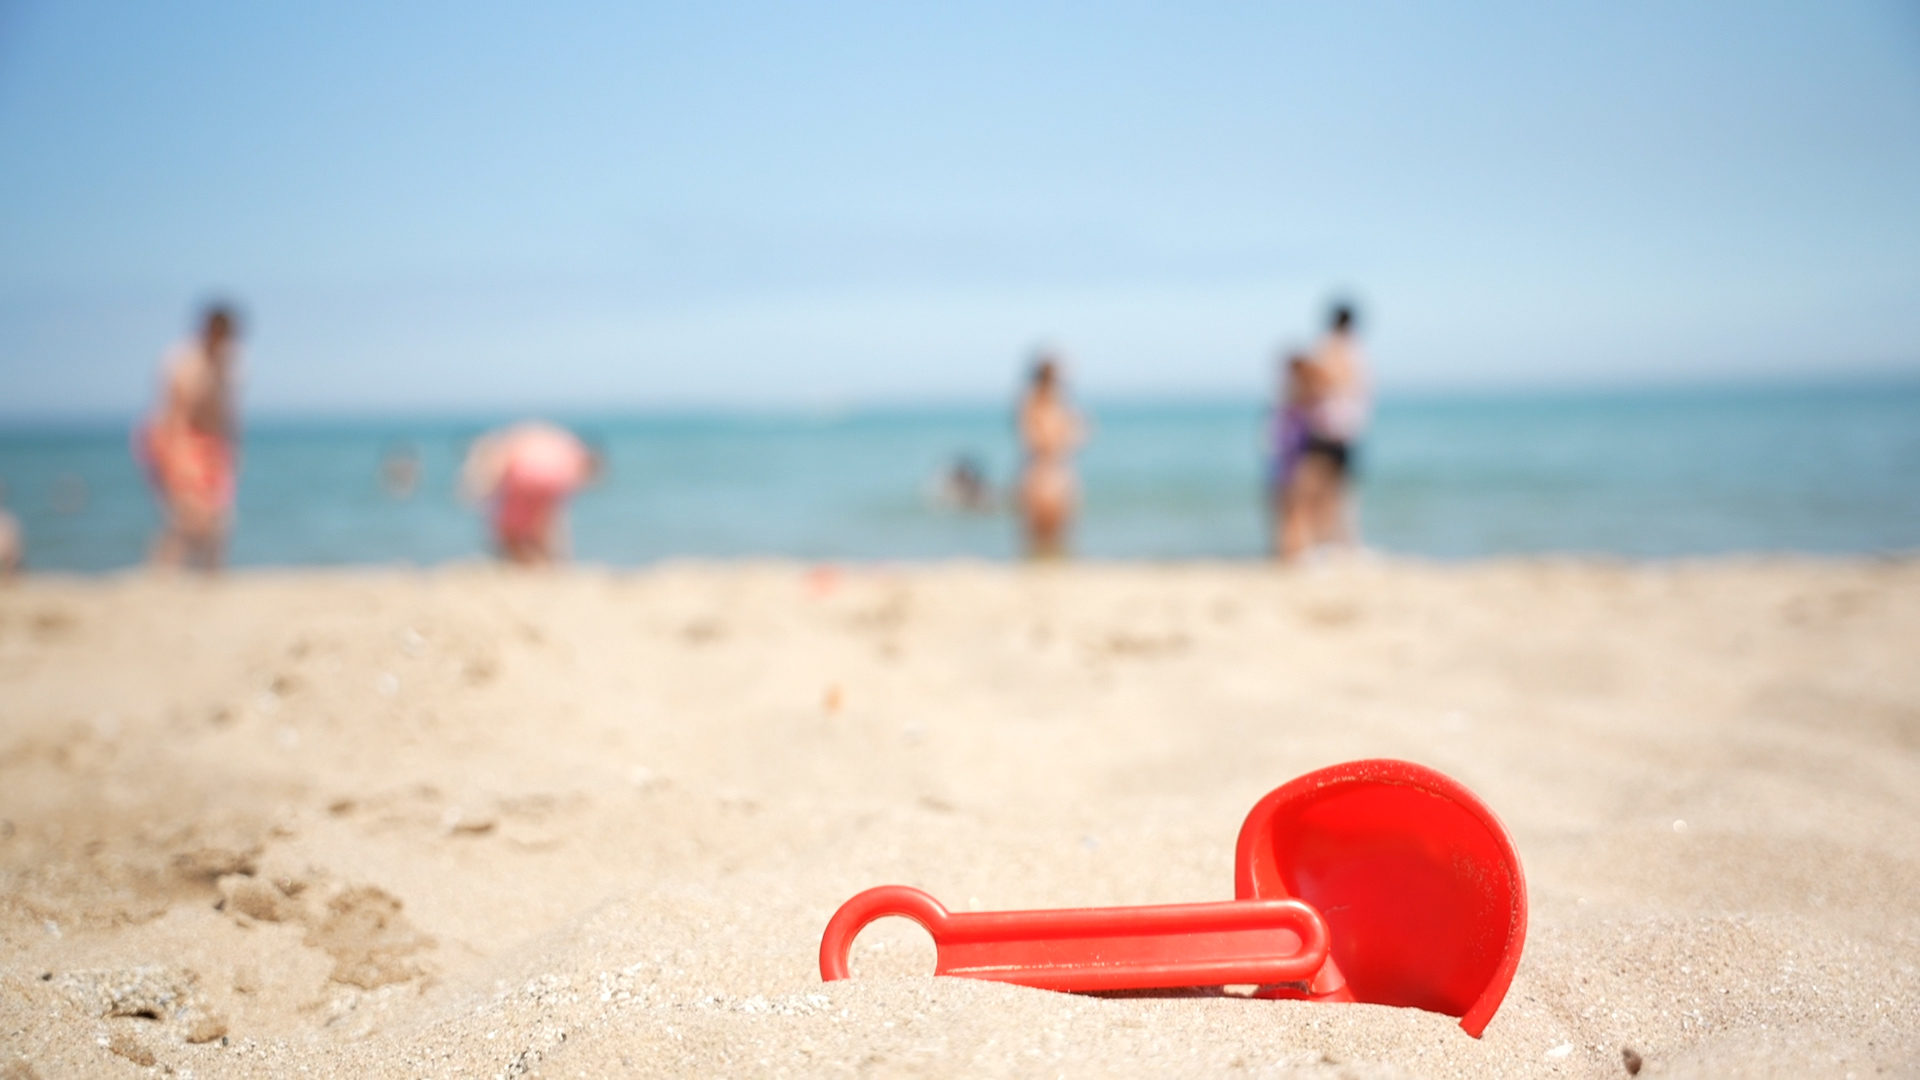 A red children's toy buried in beach sand